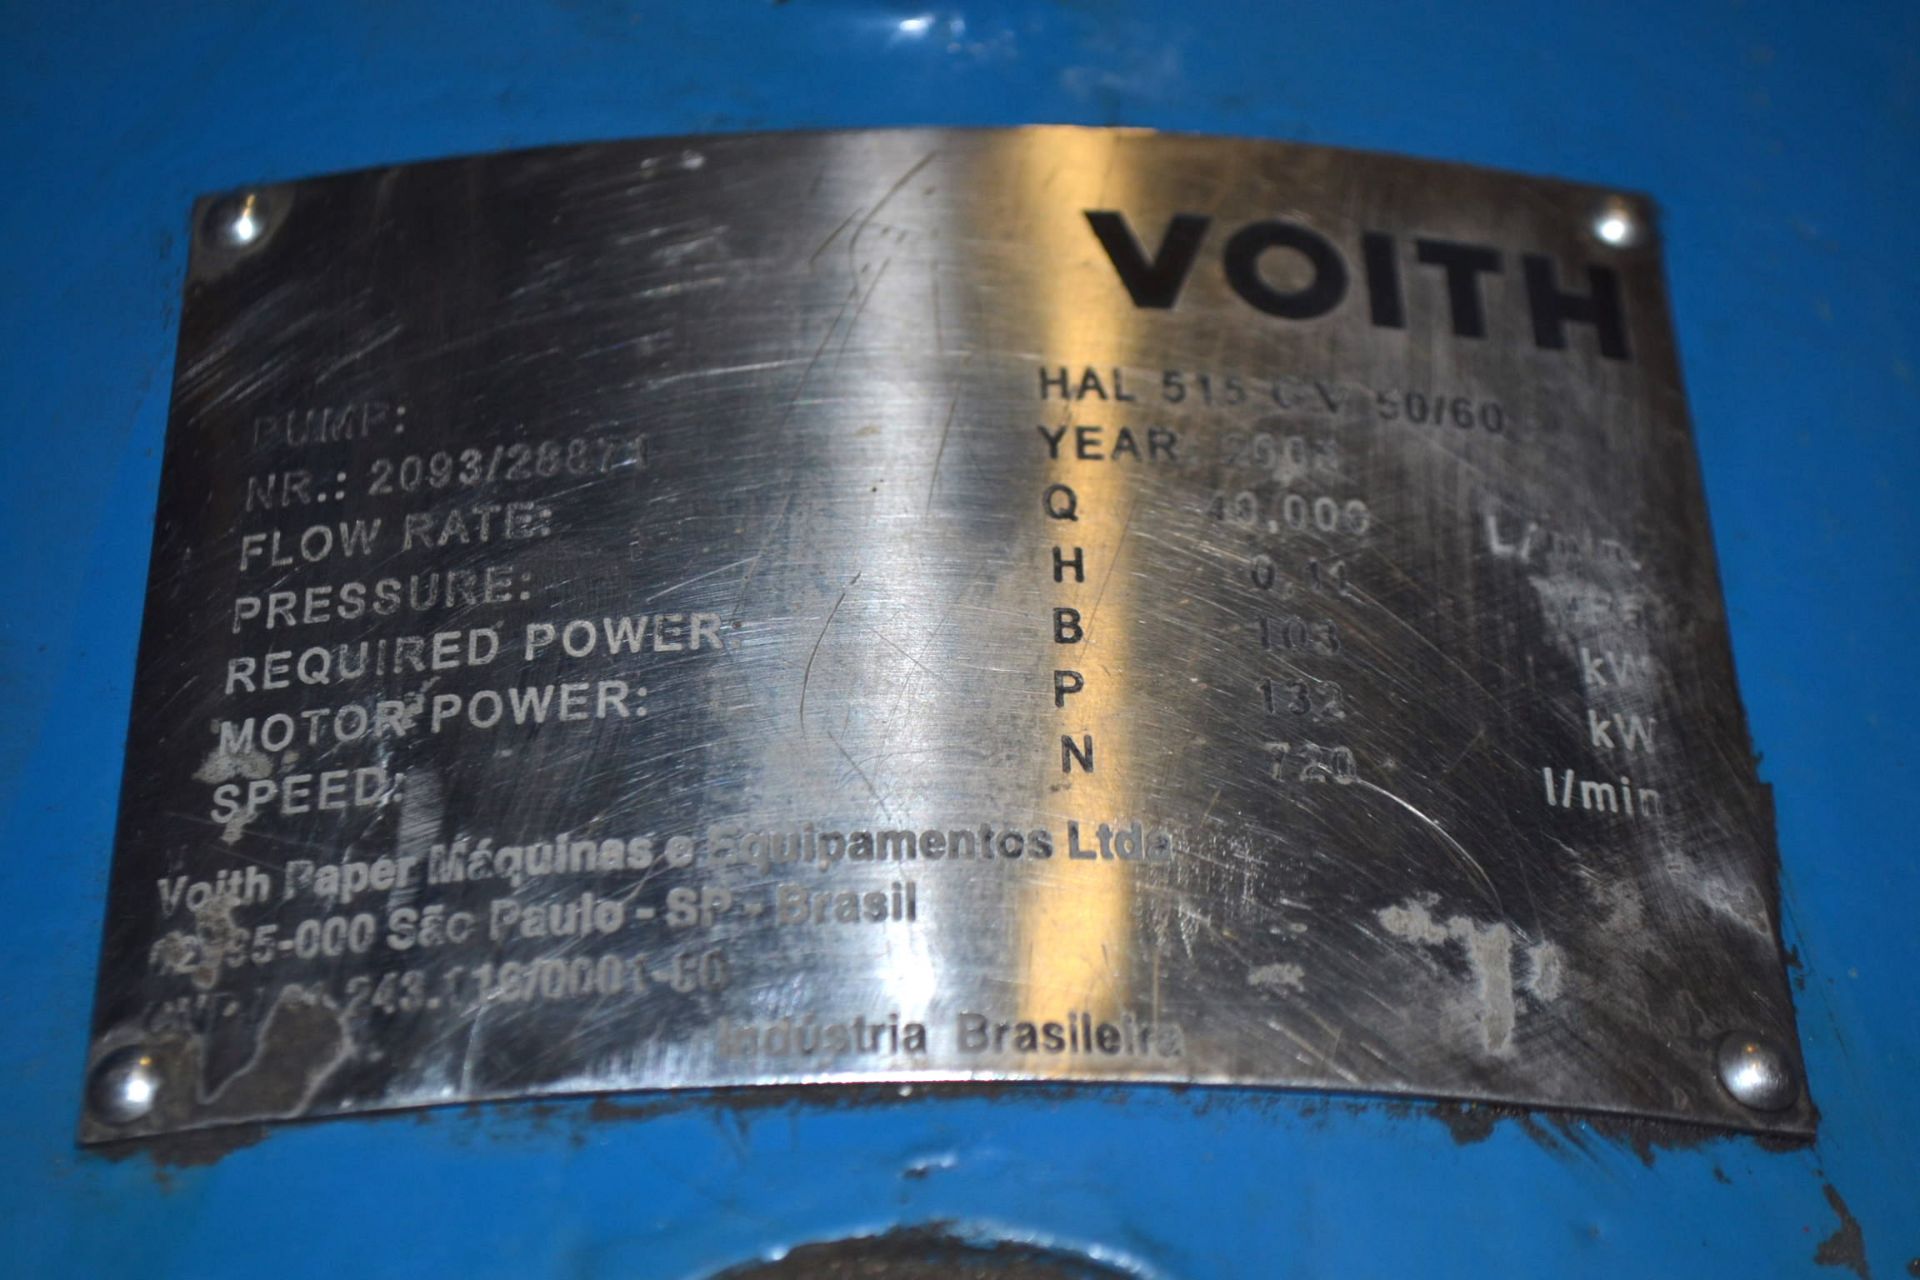 VOITH HAL 515 GV 50/60 CENTRIFUGAL PUMP 24X20-21 40000LPM IRON CASING STAINLESS IMPELLER - Image 5 of 6